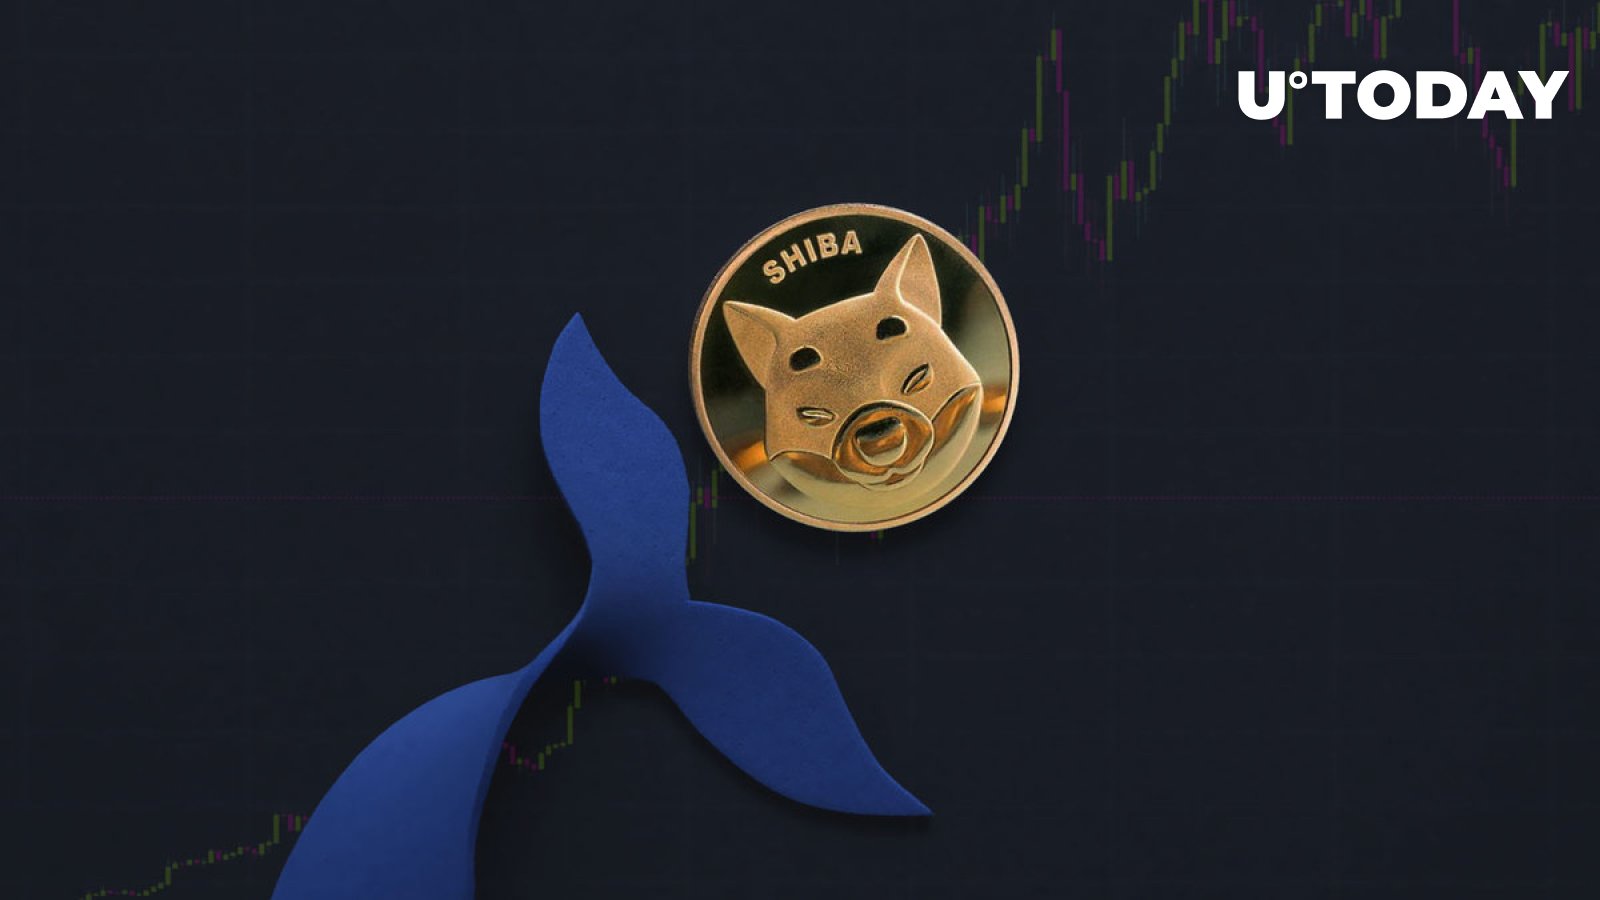 Here’s Why Top Whales Sold 1.4 Trillion SHIB, According to Fresh Trading Data